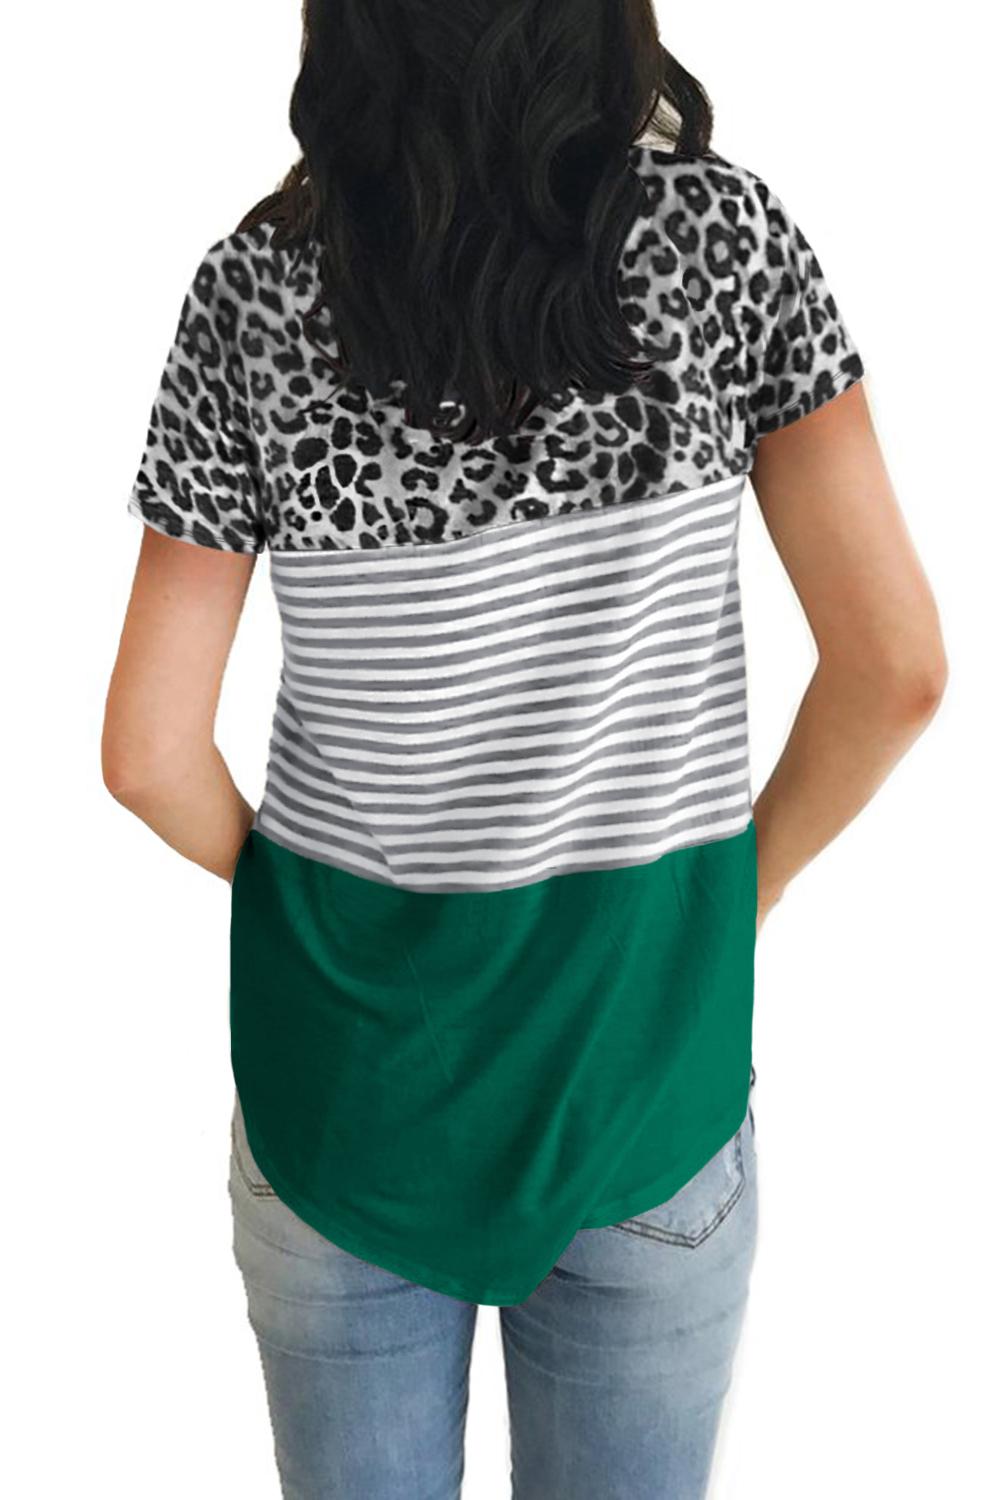 Meselling99 Green Block Striped and Leopard Short Sleeve Tee--Free Shipping at meselling99